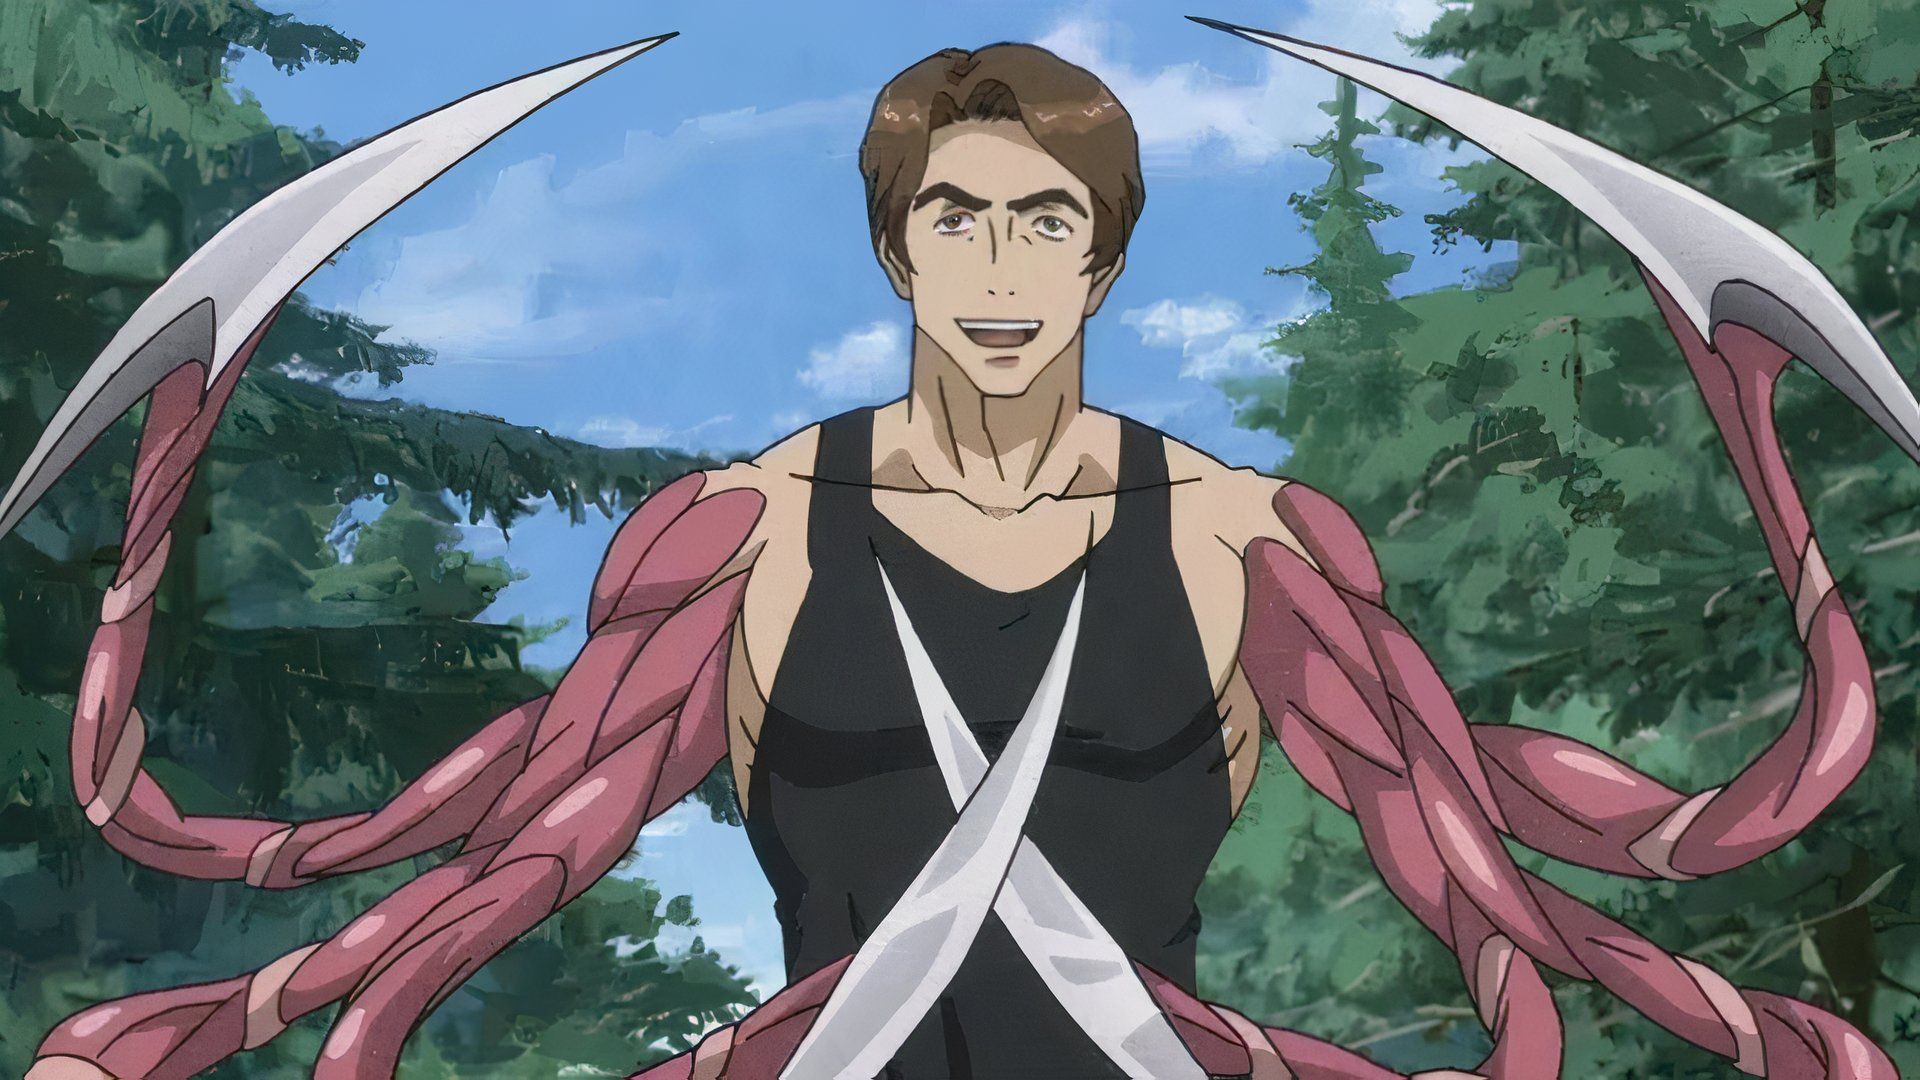 A man with tentacle blade arms in Parasyte: The Maxim